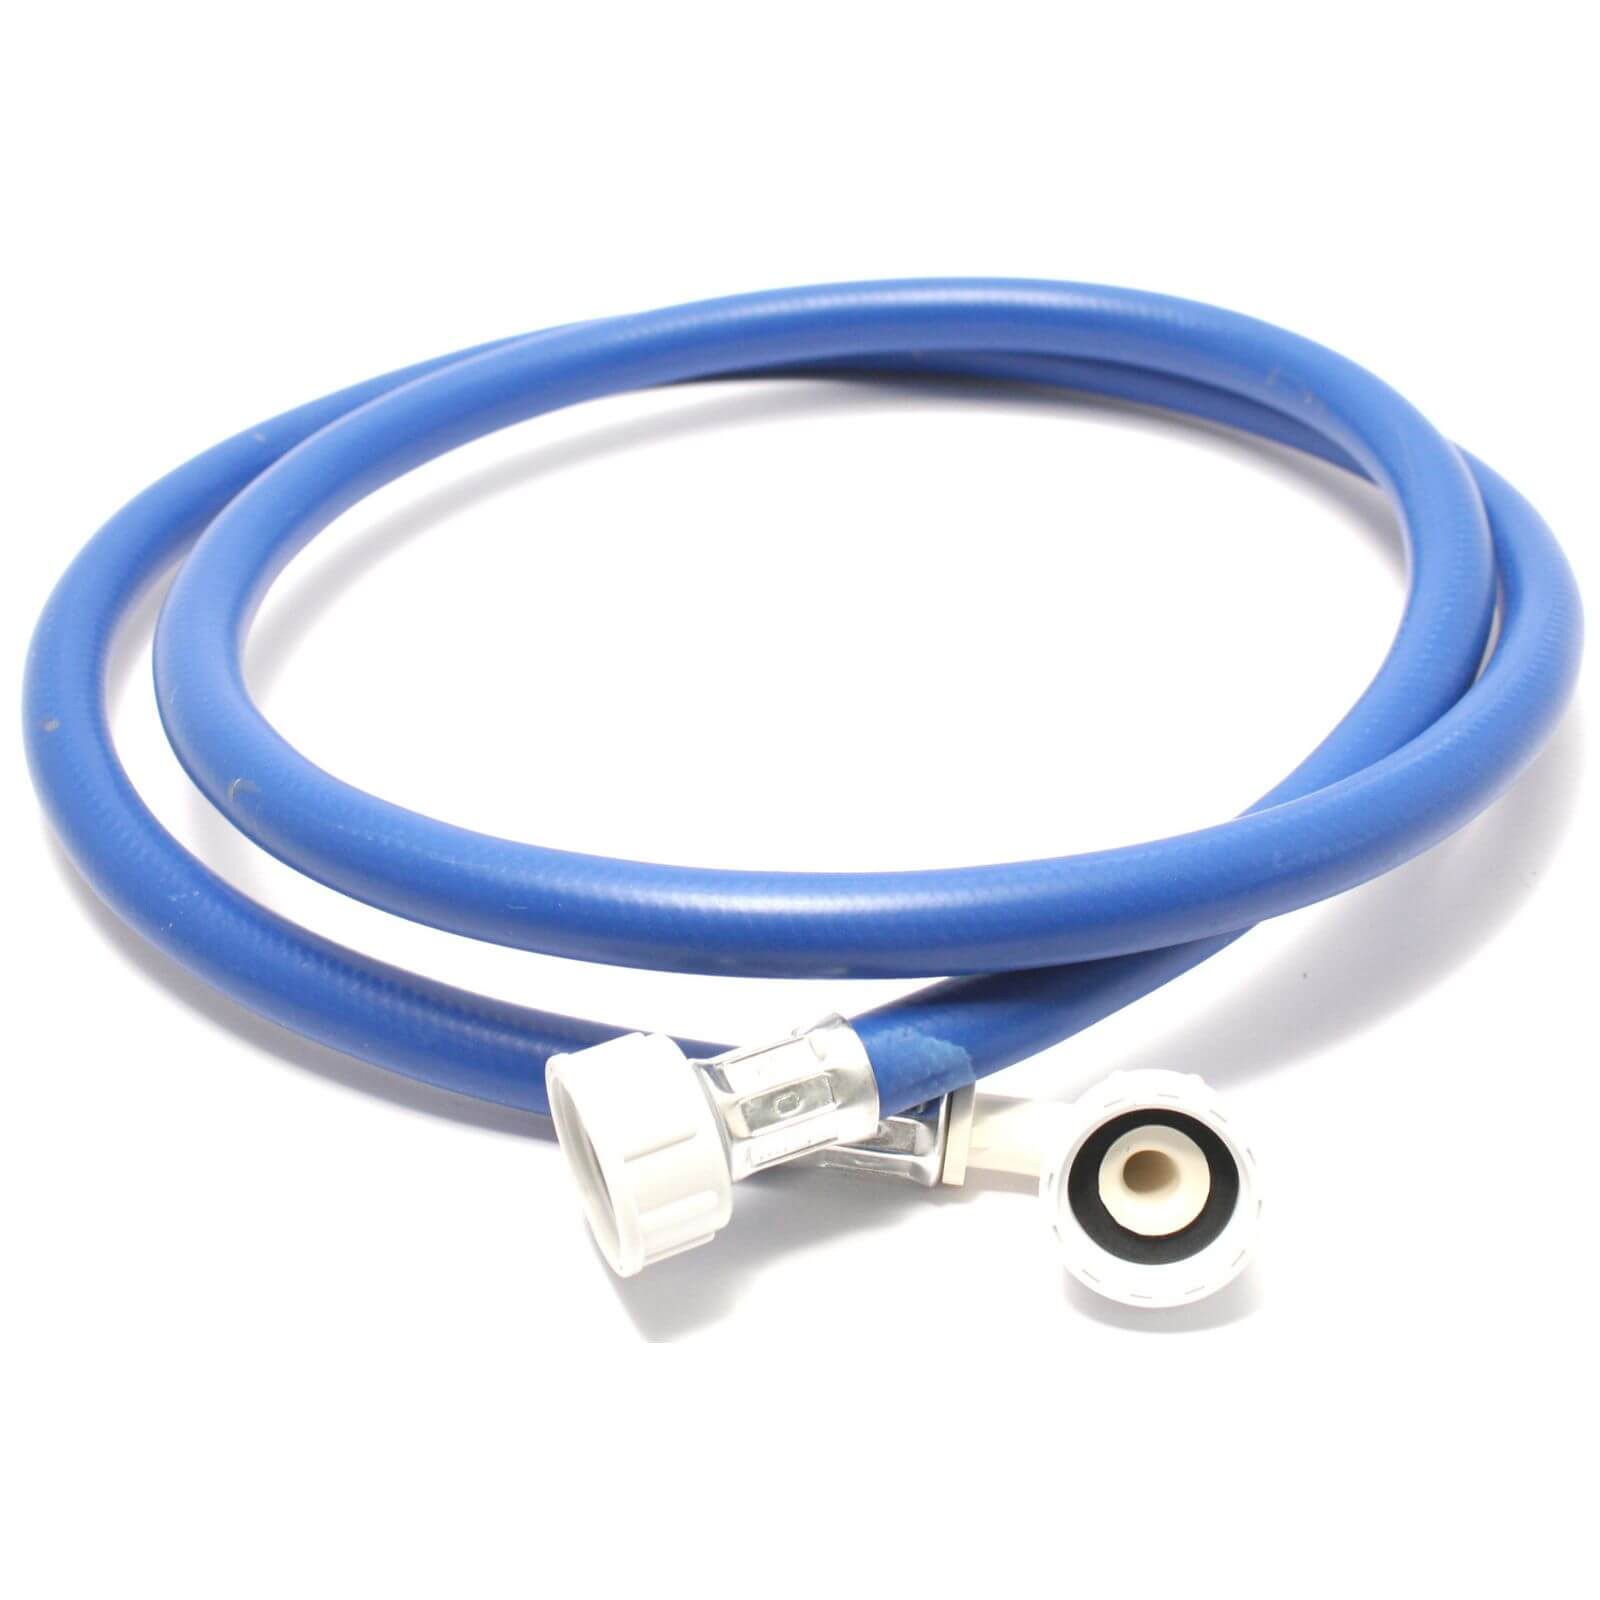 Photo of Oracstar Inlet Hose Bend - 90 Degree - 2.5m